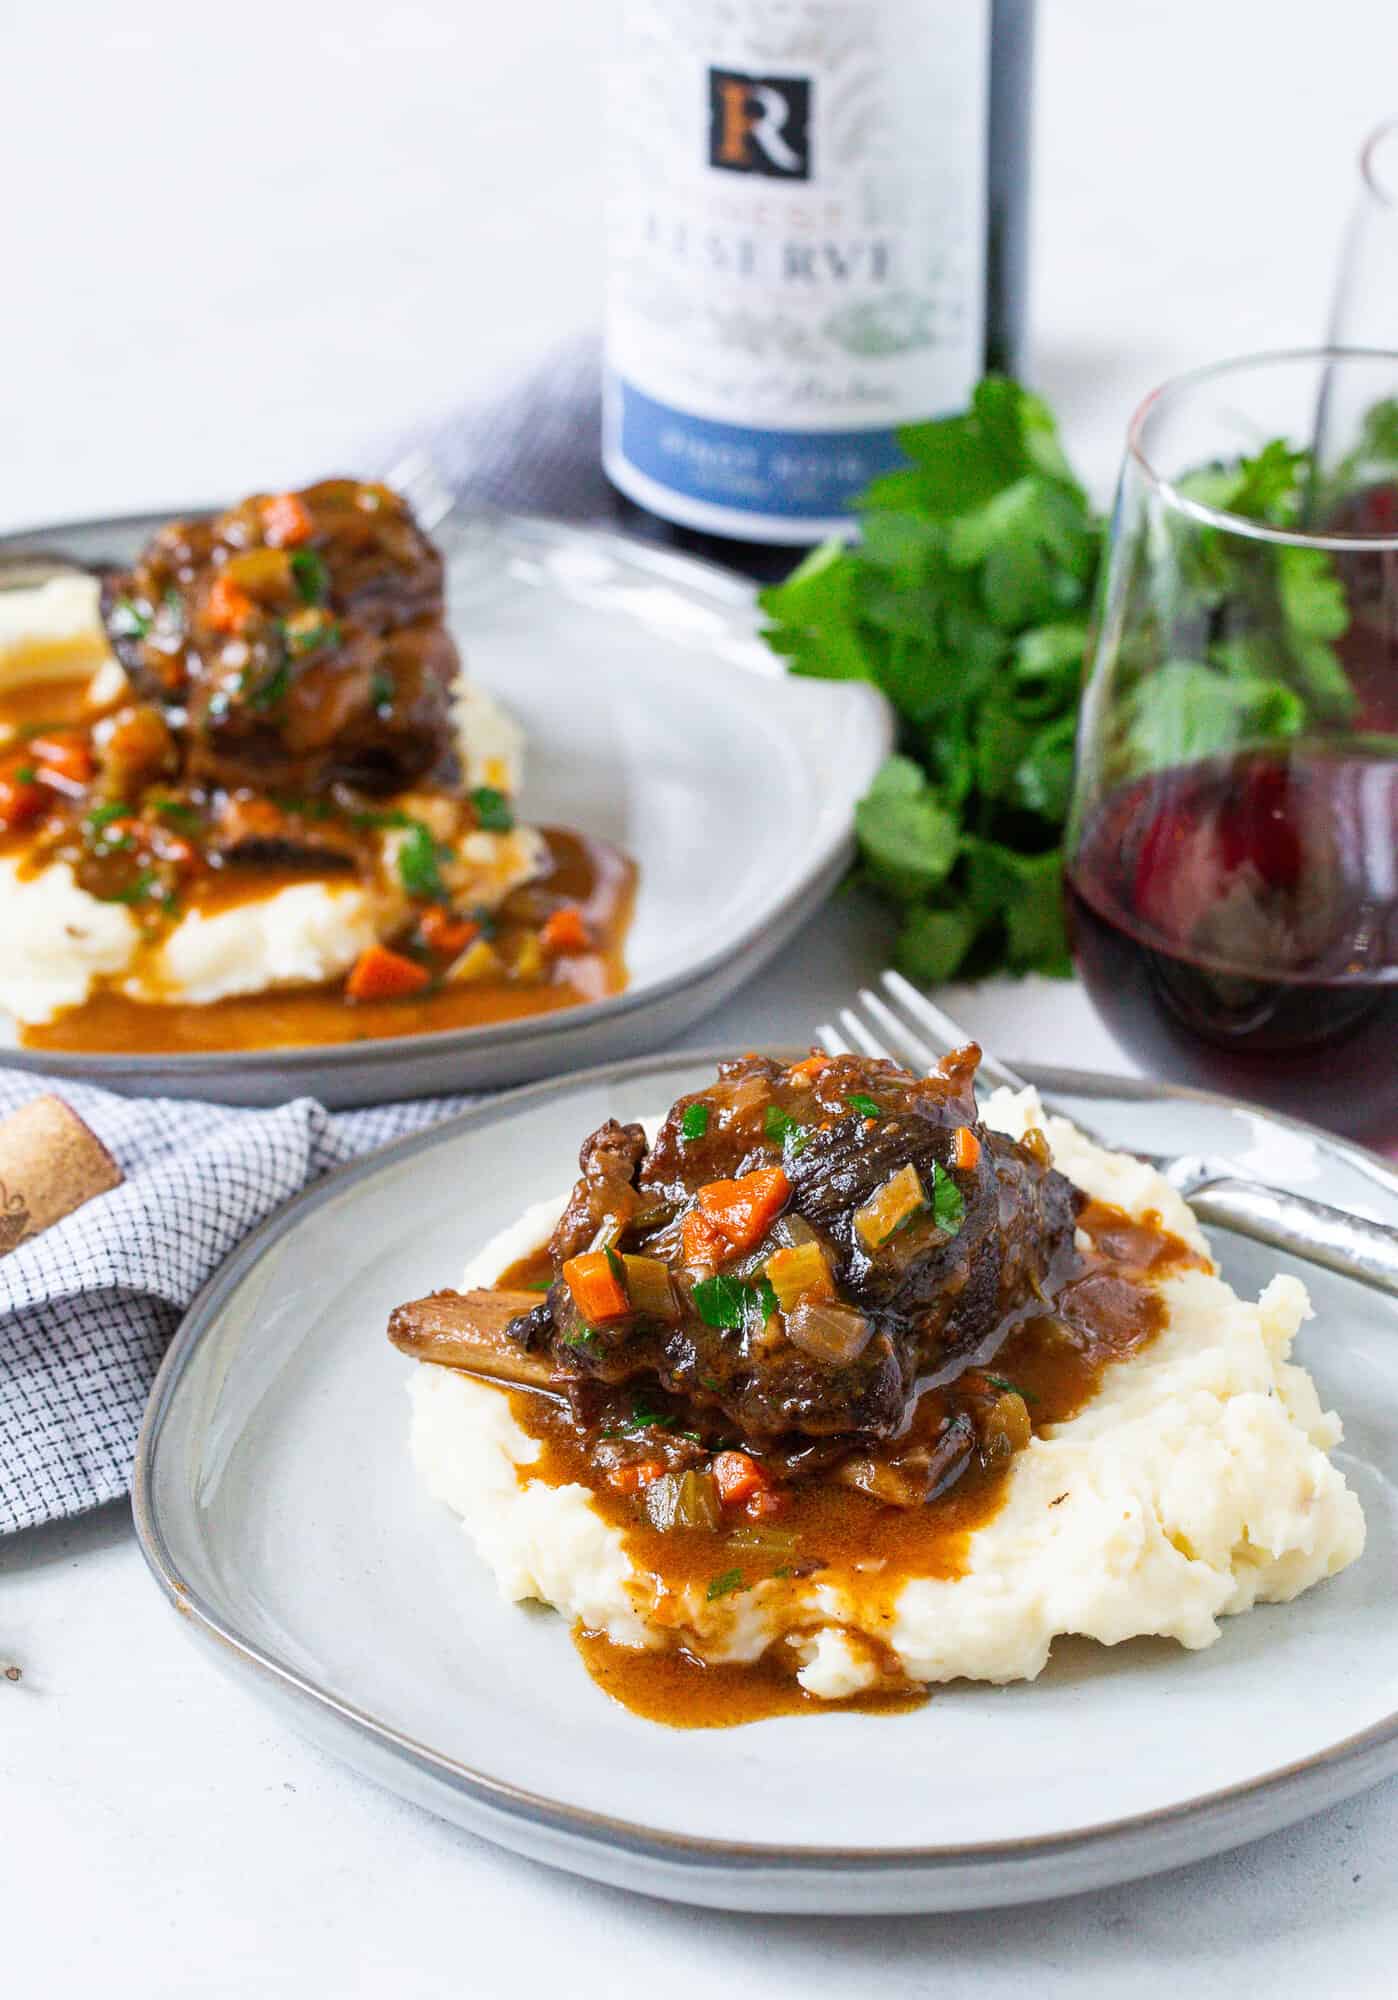 Short ribs on top of mashed potatoes, bottle of wine in the background.